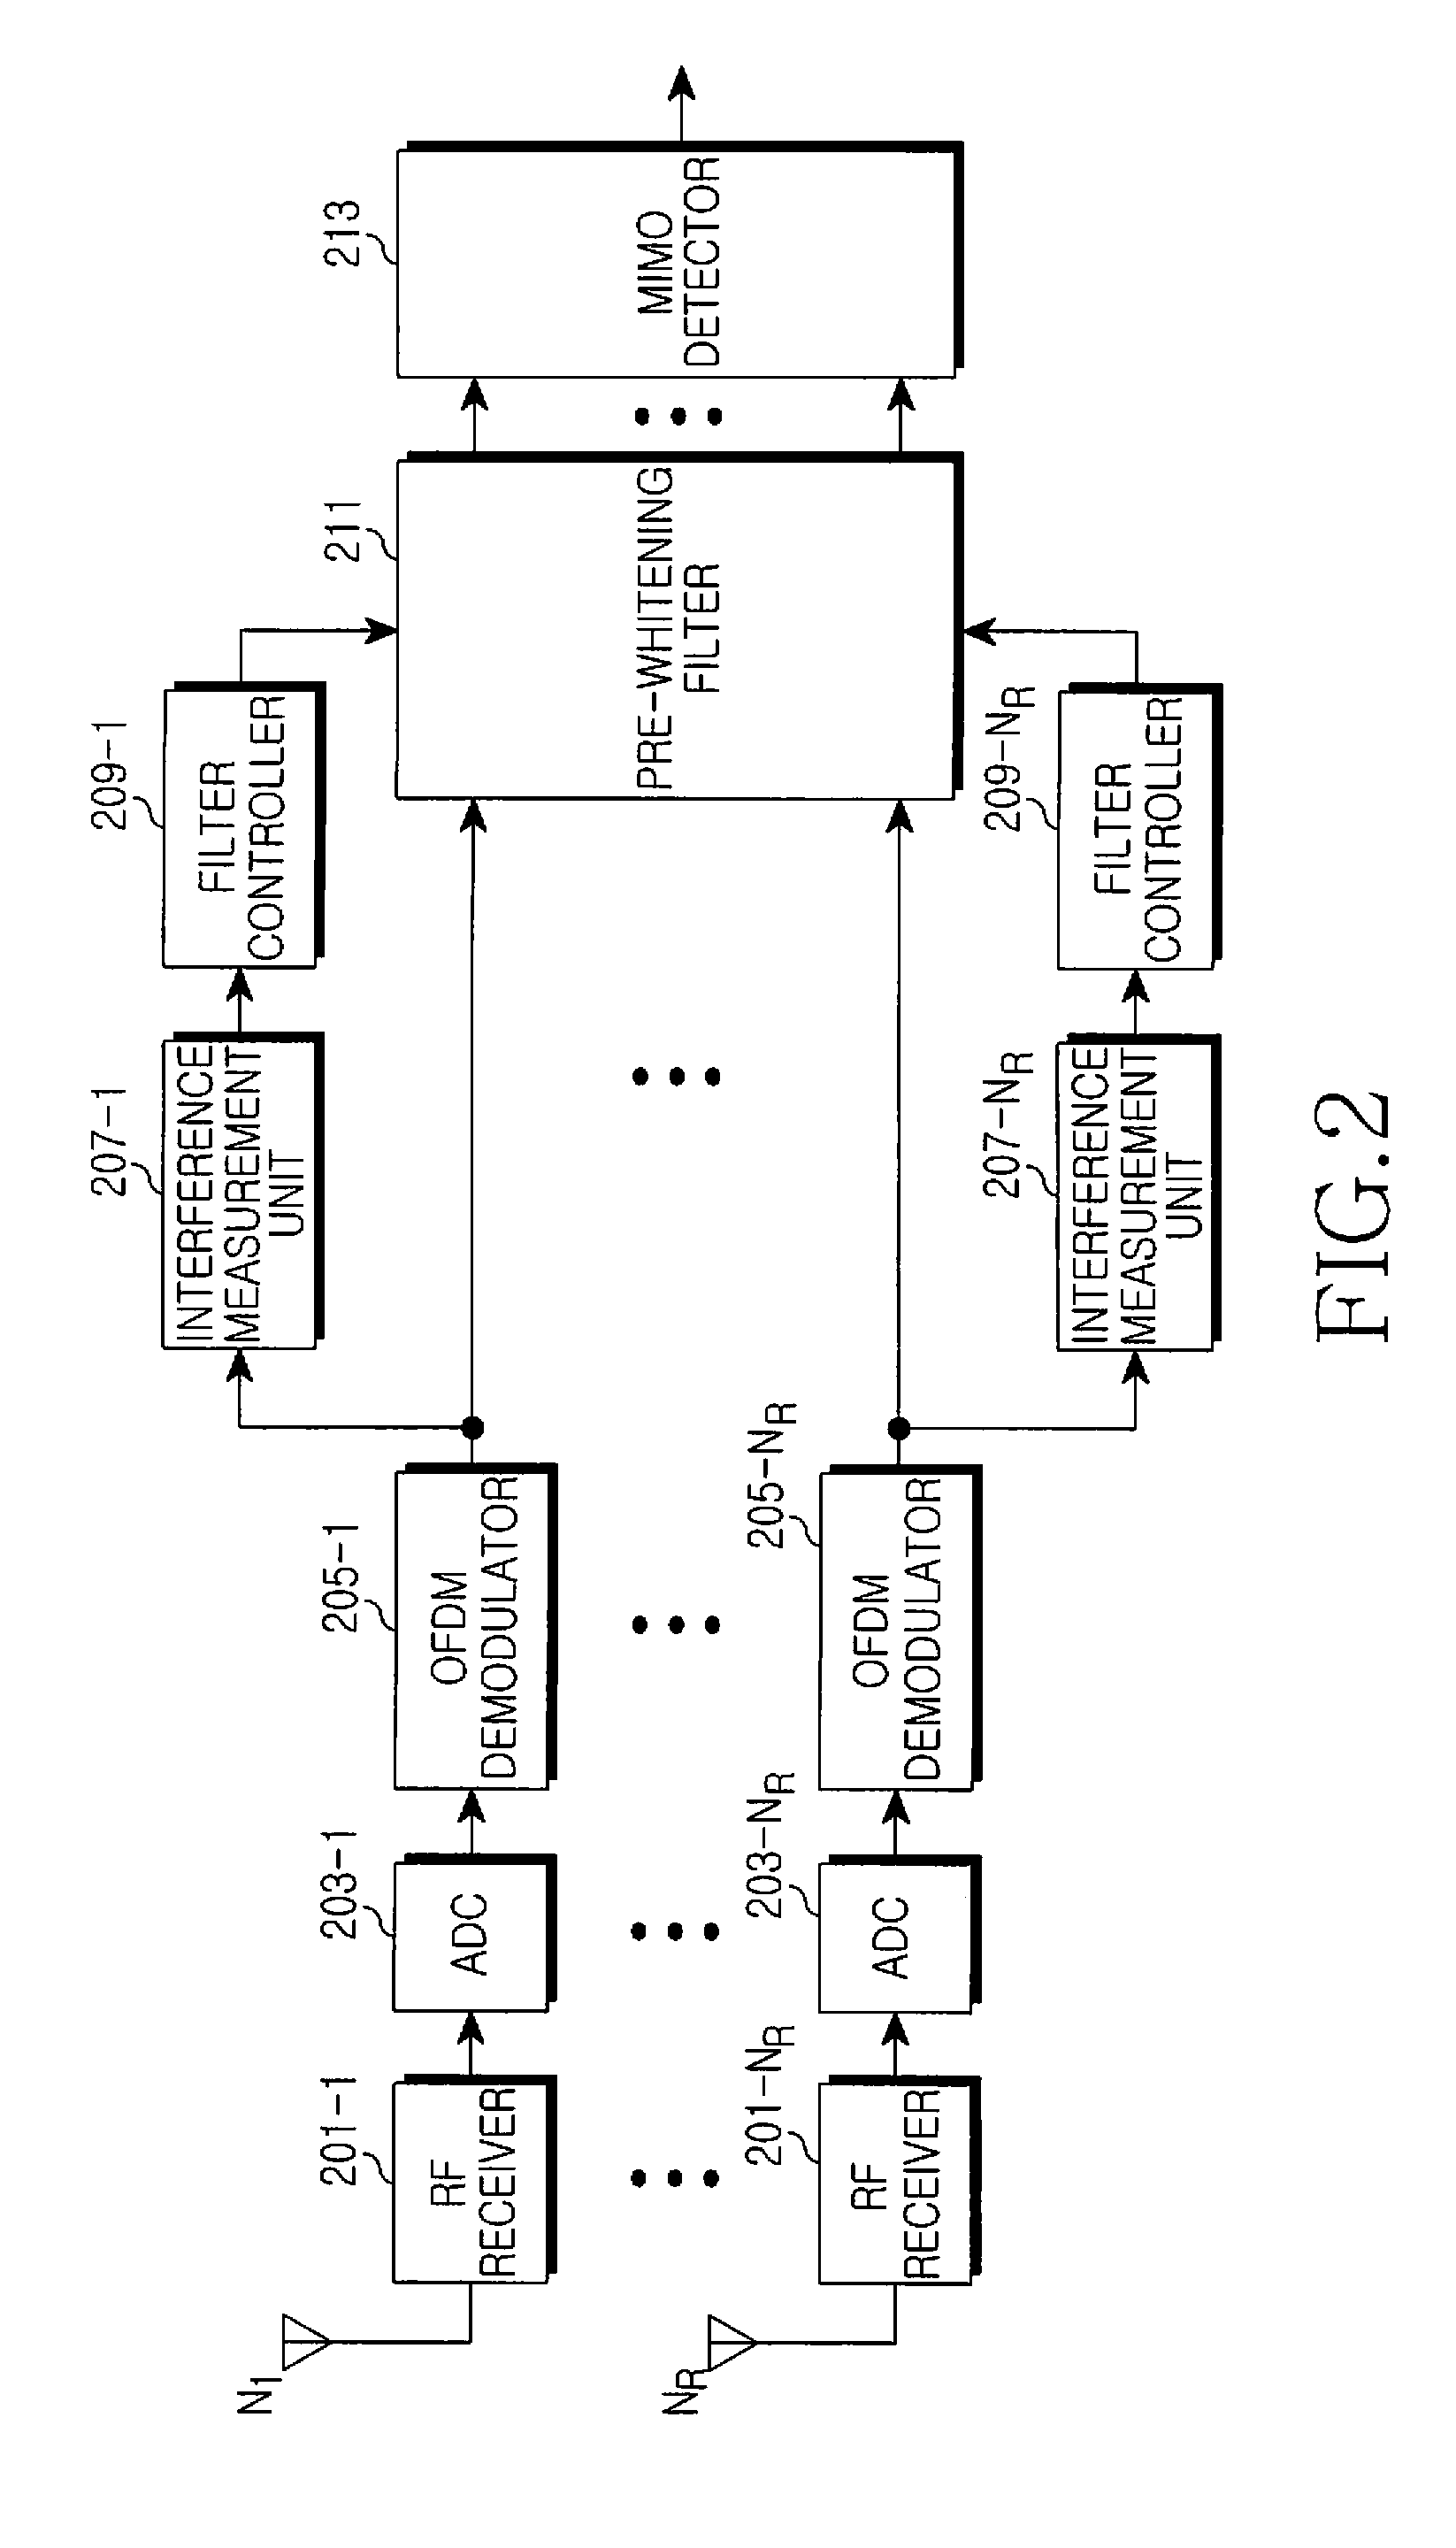 Apparatus and method for adaptive whitening in a multiple antenna system